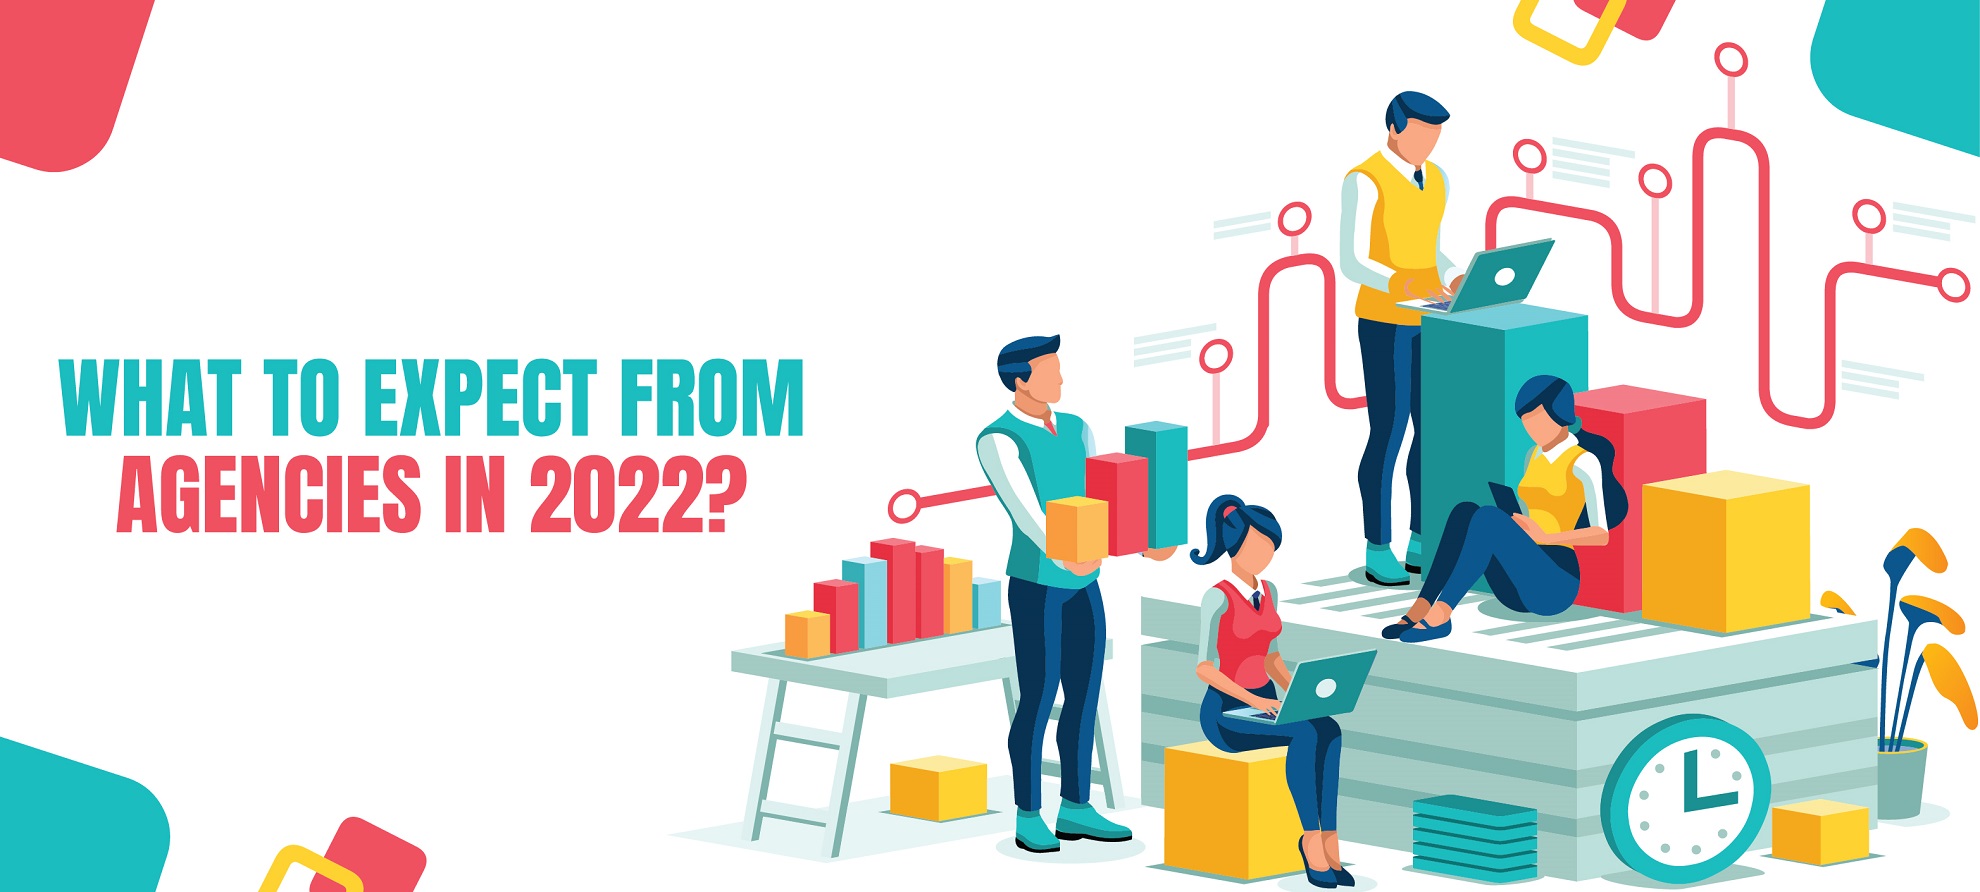 what to expect from agencies in 2022